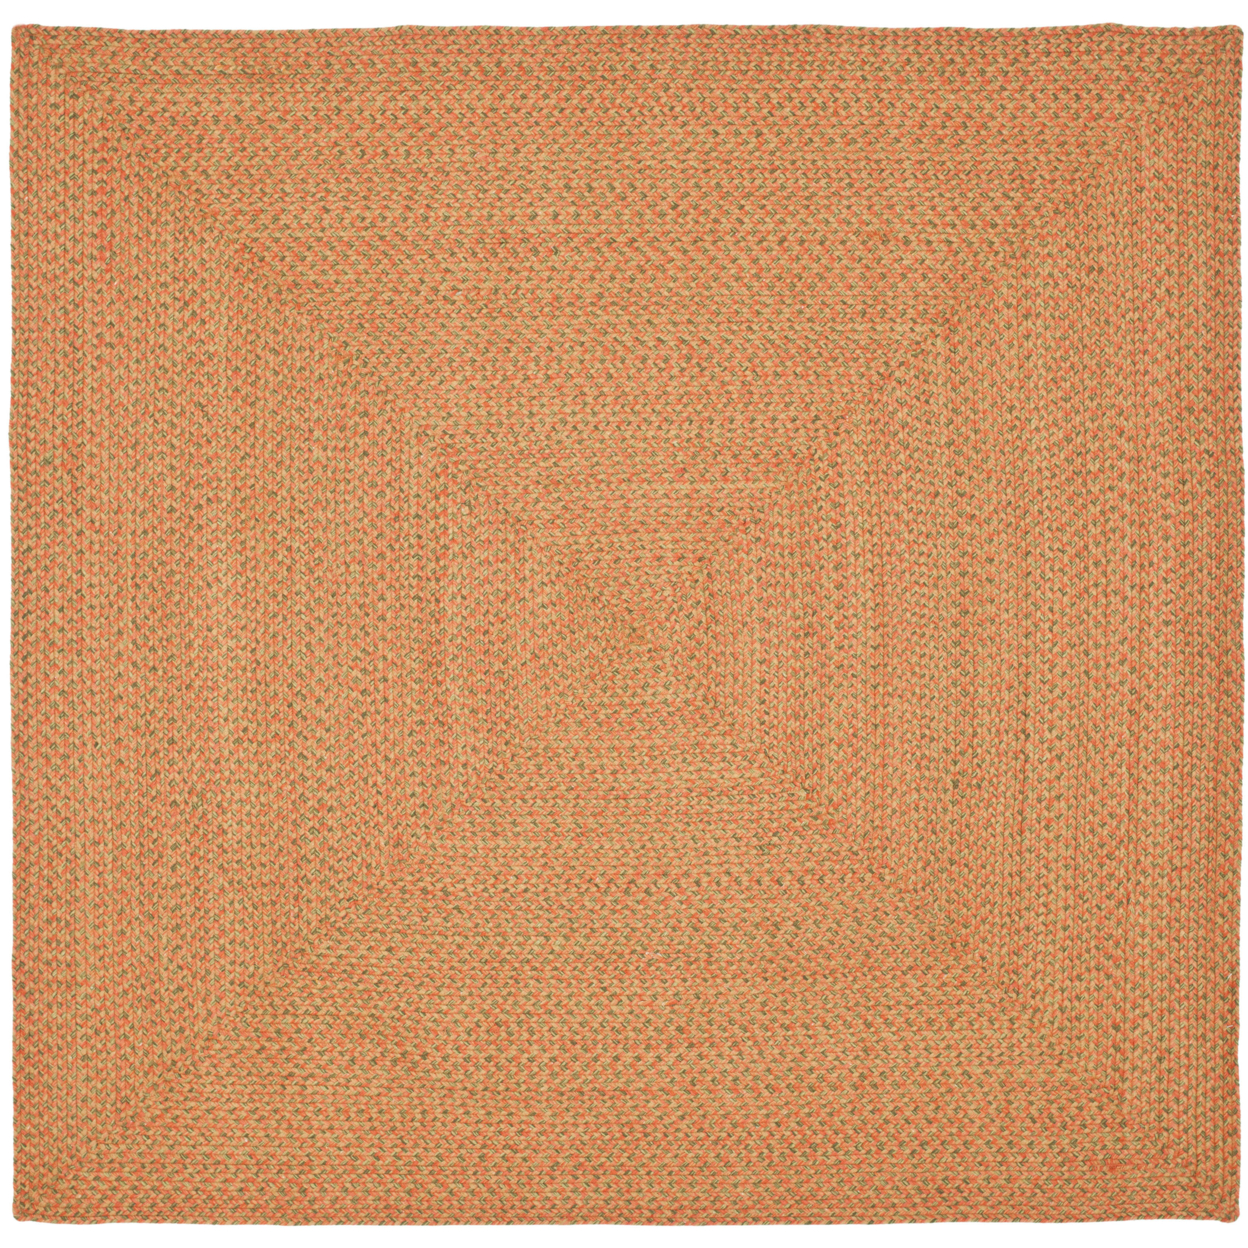 SAFAVIEH Braided Collection BRD166A Handwoven Multi Rug - 6' Square